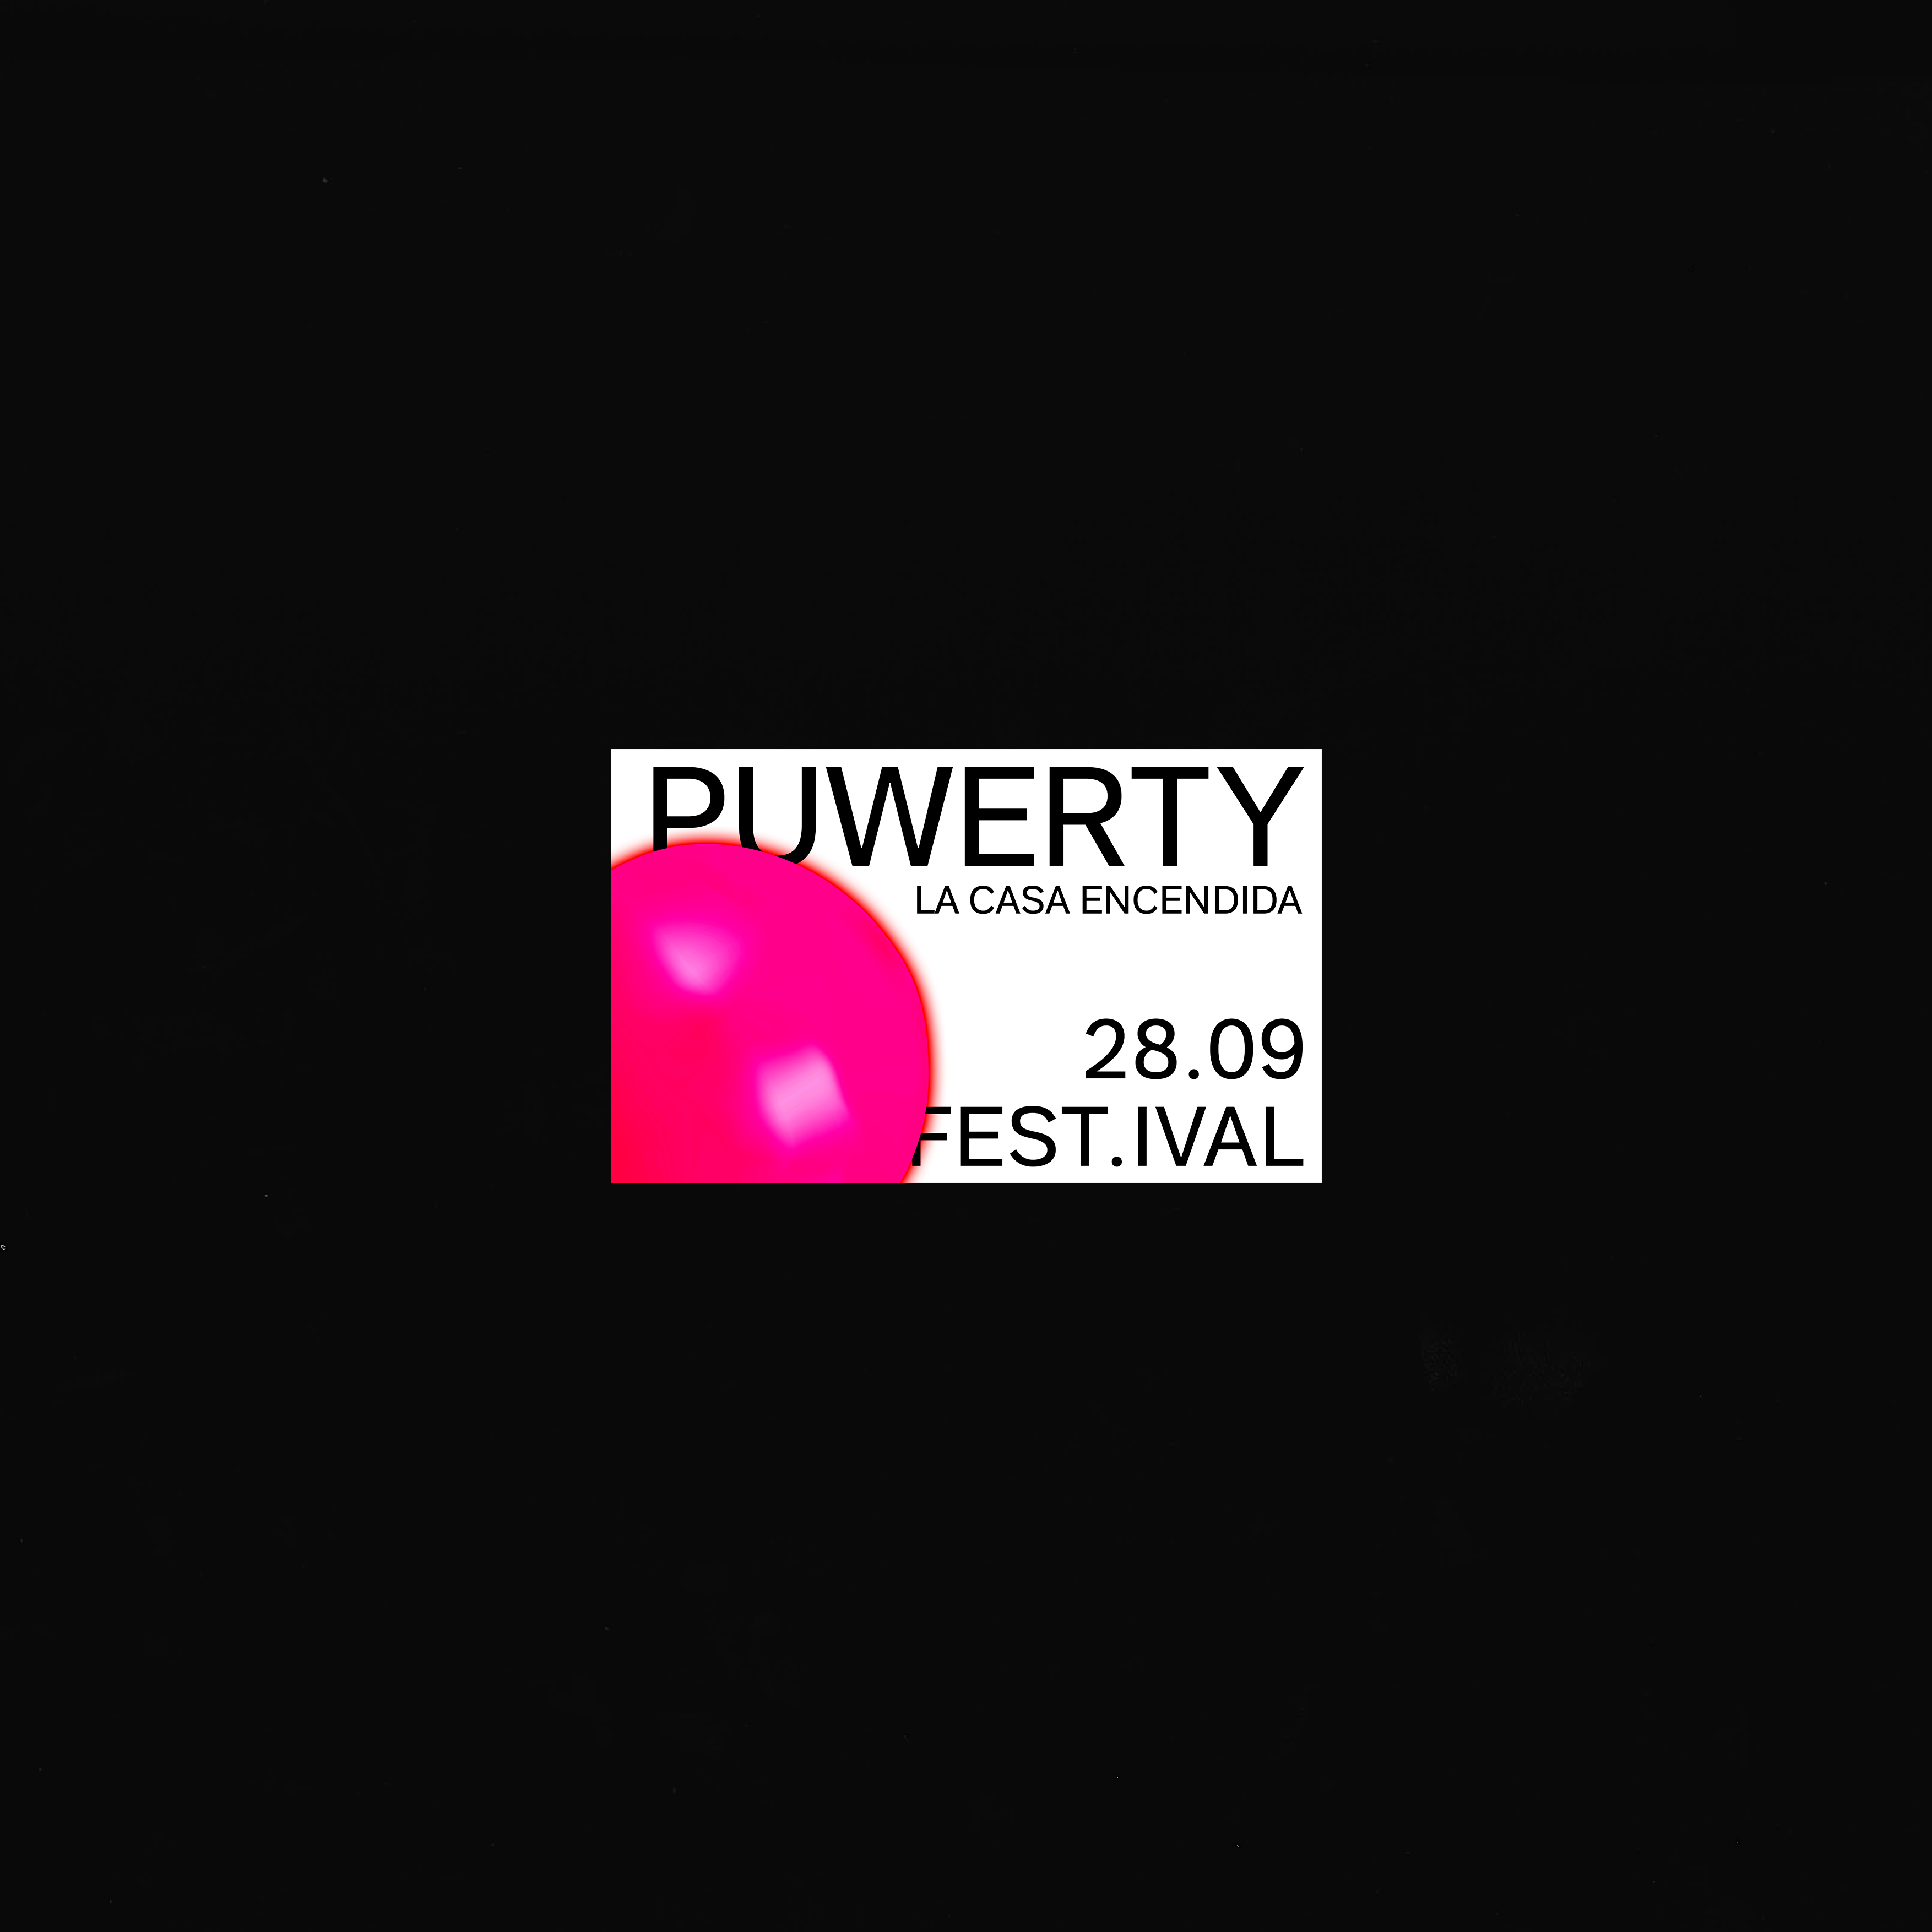 Puwerty Festival 2019 by David Cabezuelo Polo  - Creative Work - $i